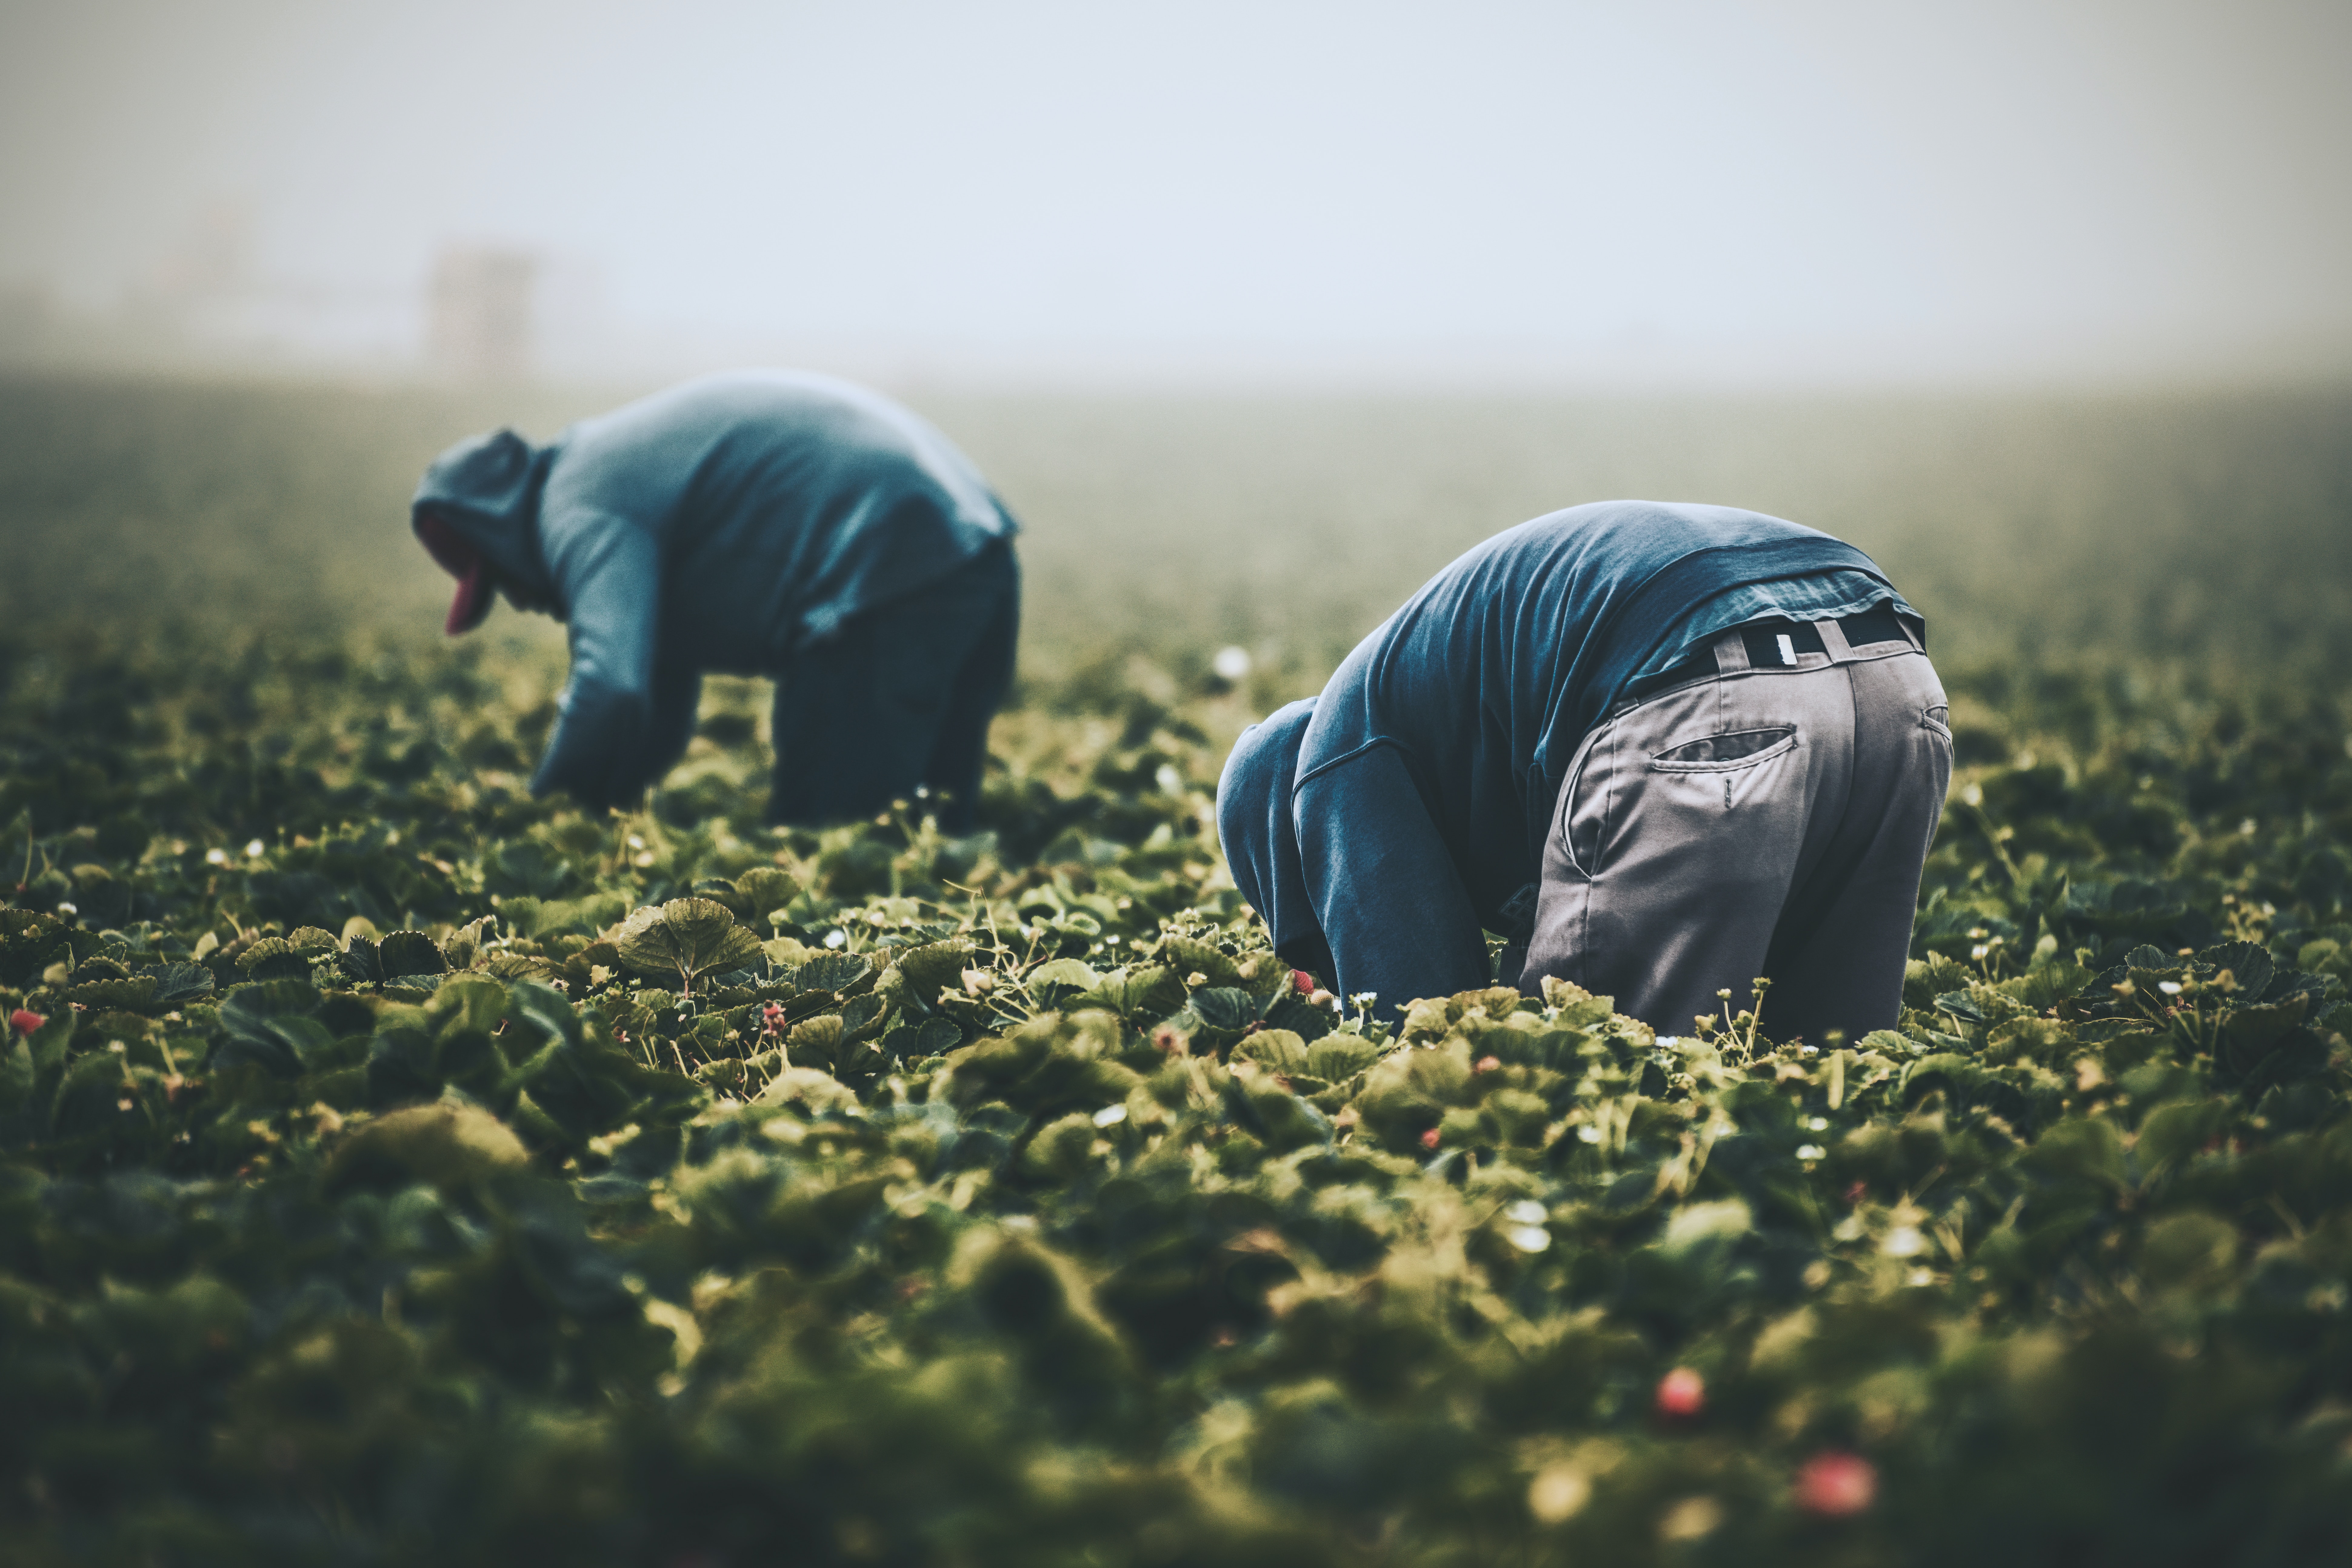 Centering Worker Rights: Insights from the Fair Food Program